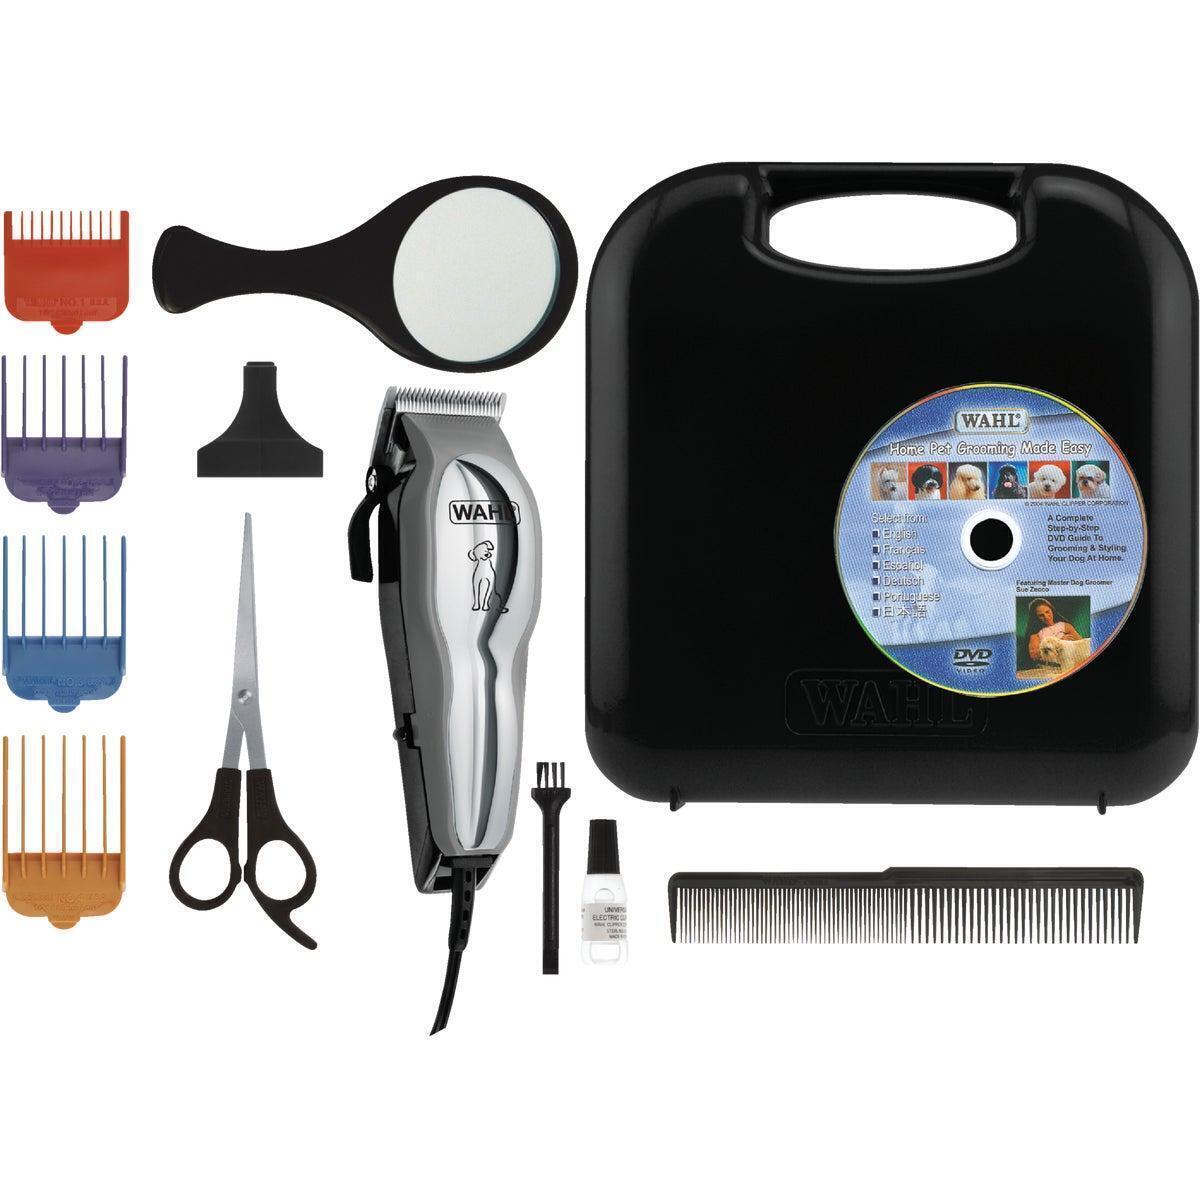 Wahl Pet-Pro 12-Piece Animal Clipper Kit 9281-210 Pack of 3